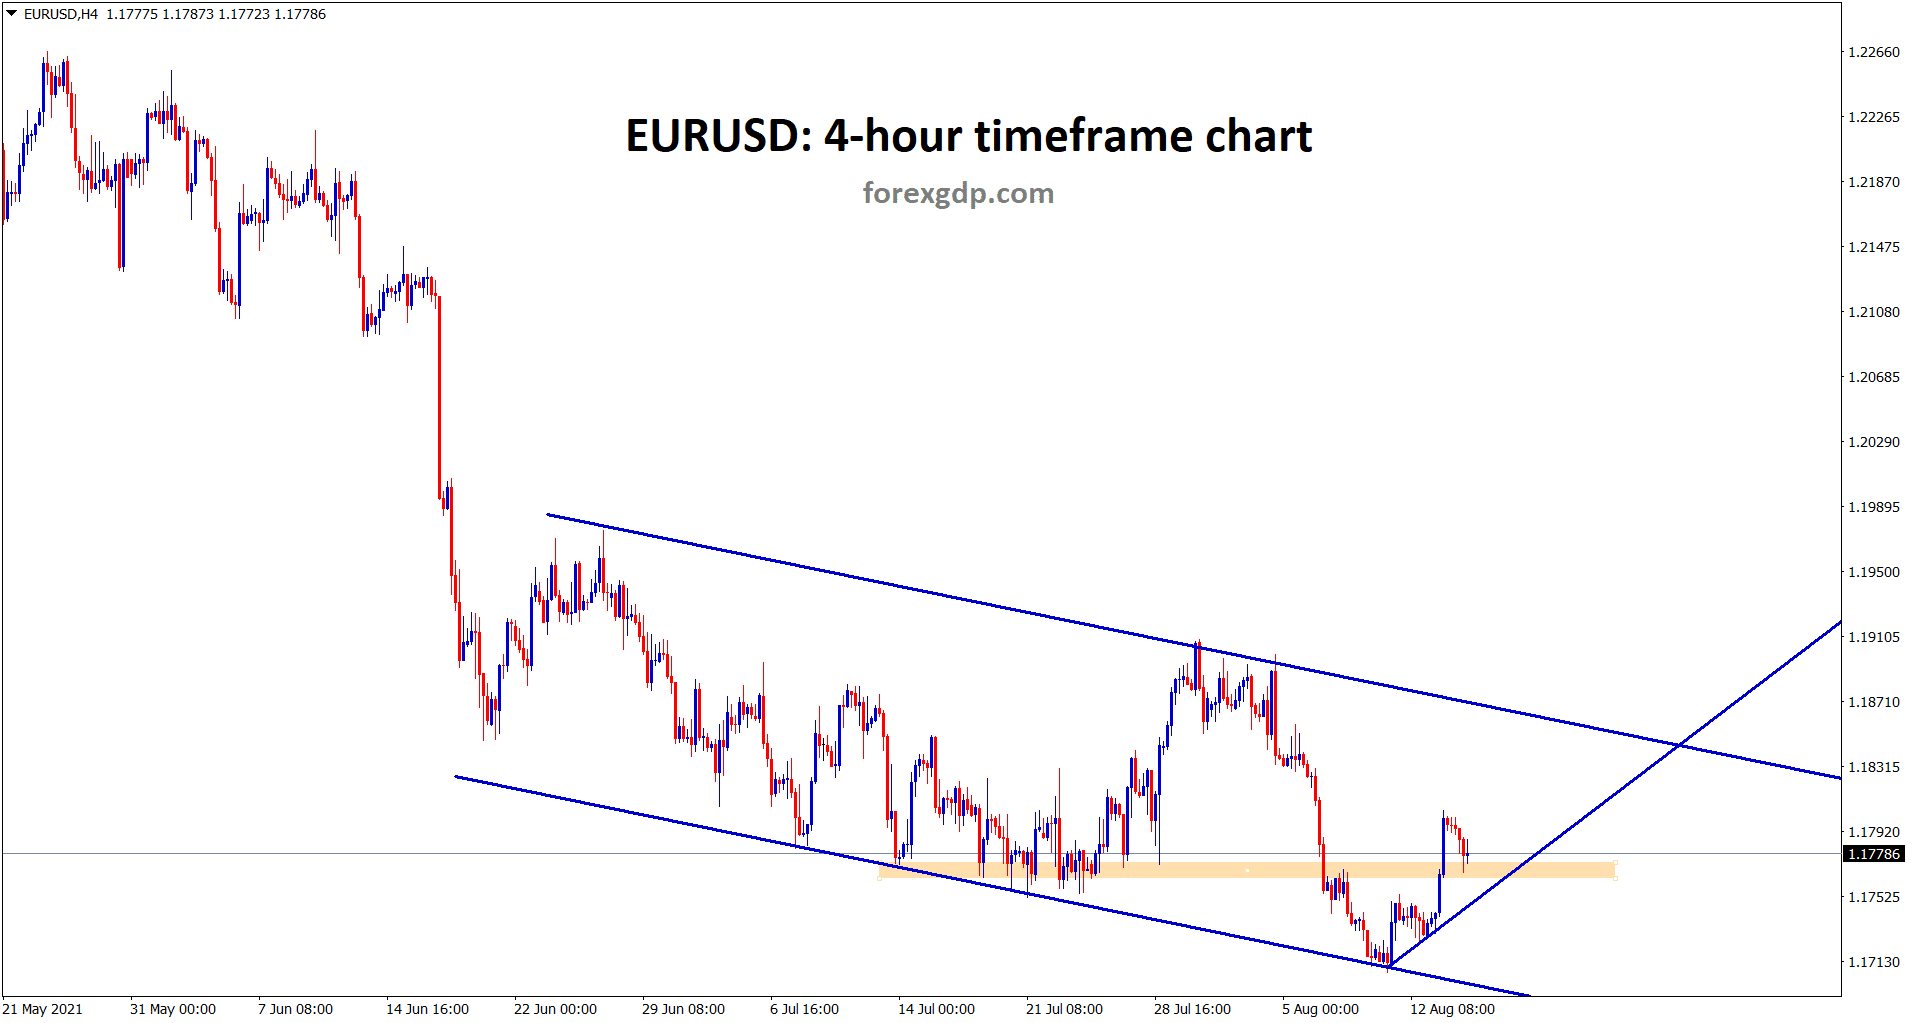 EURUSD is moving up slowly between this descending channel range